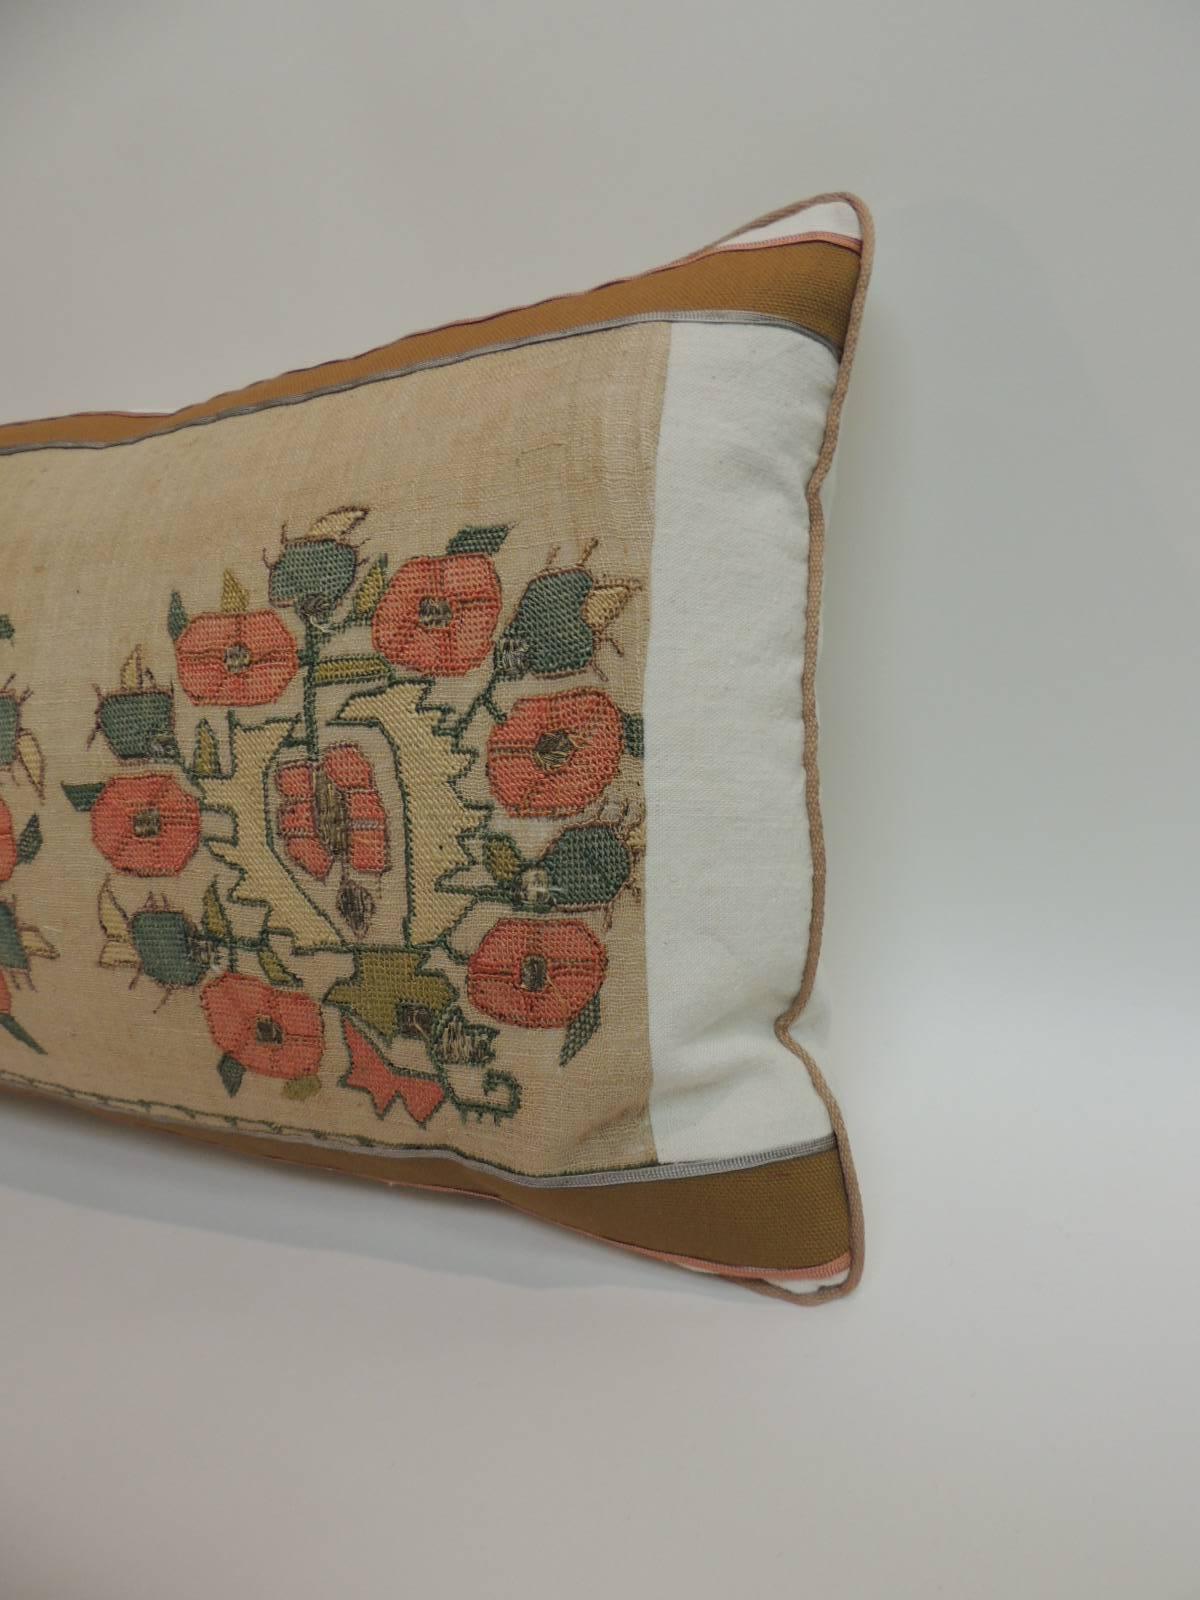 Antique hand-embroidery floral textile decorative pillow with silk and metallic threads embroidered onto sheer linen. Antique textile bolster pillow embellished with a tan cotton frame, featuring small silk trims at the seams and tan rope cord all